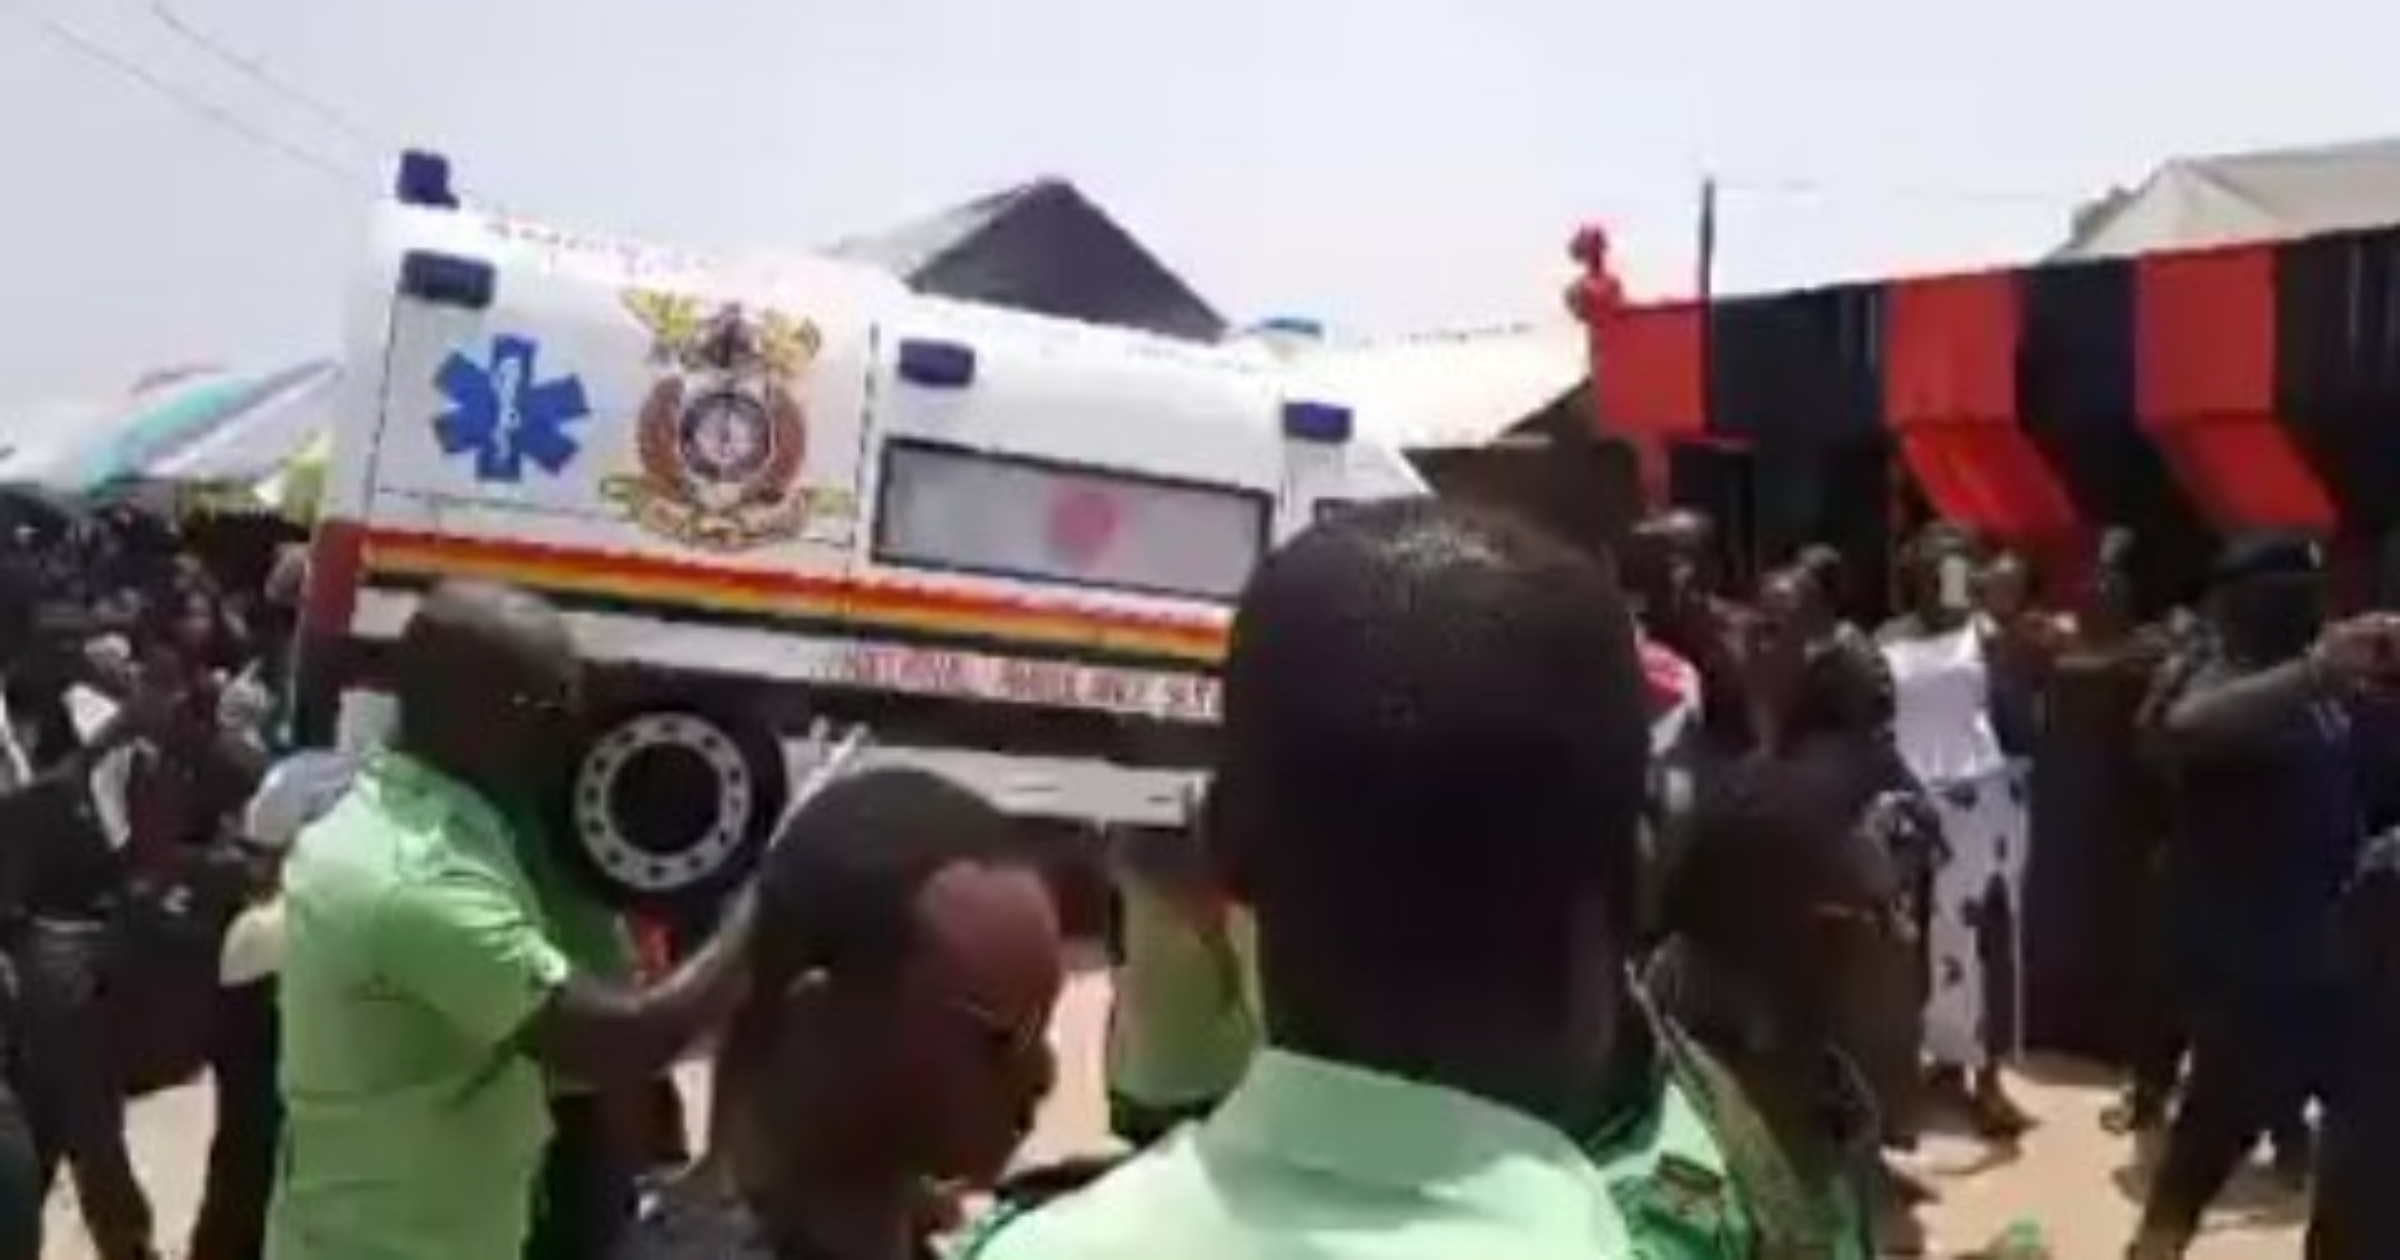 Ambulance Driver Killed By Robbers While Transporting A Woman In Labour Buried In Ambulance Casket (Video)